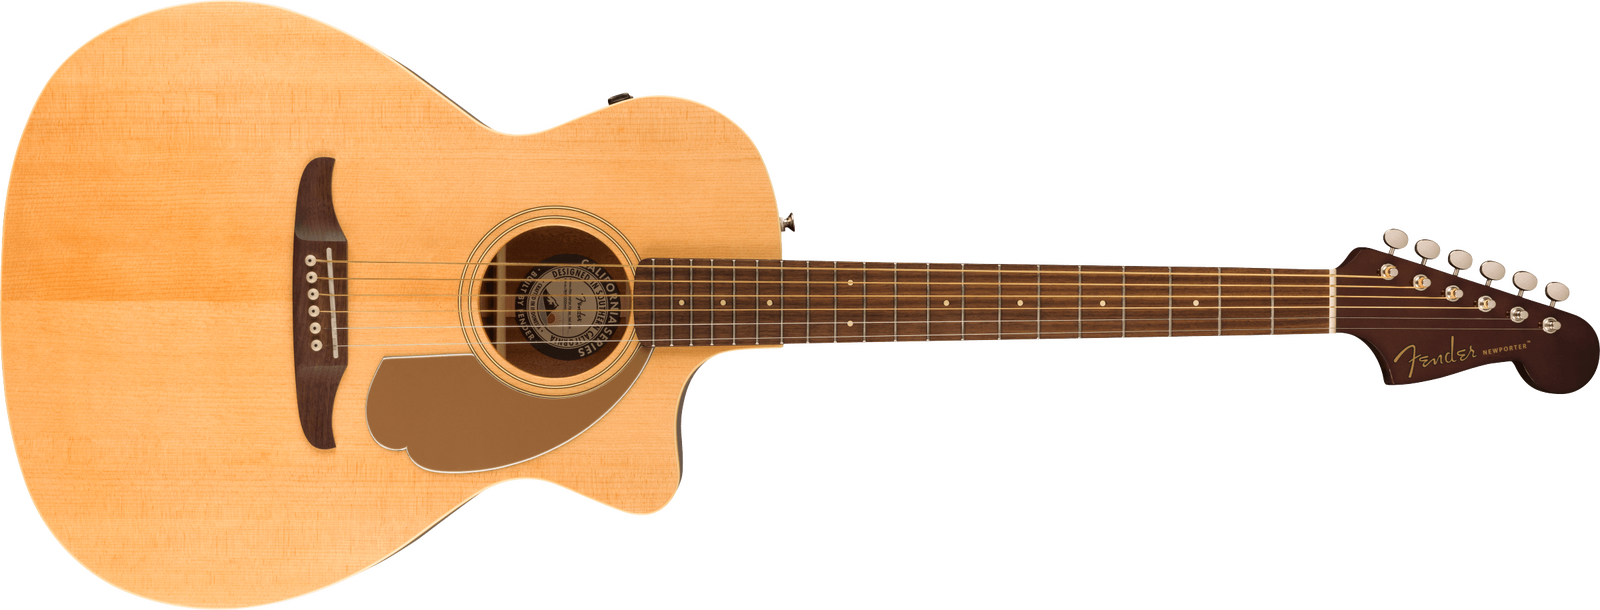 Fender Newporter Player Acoustic Electric Guitar in Natural